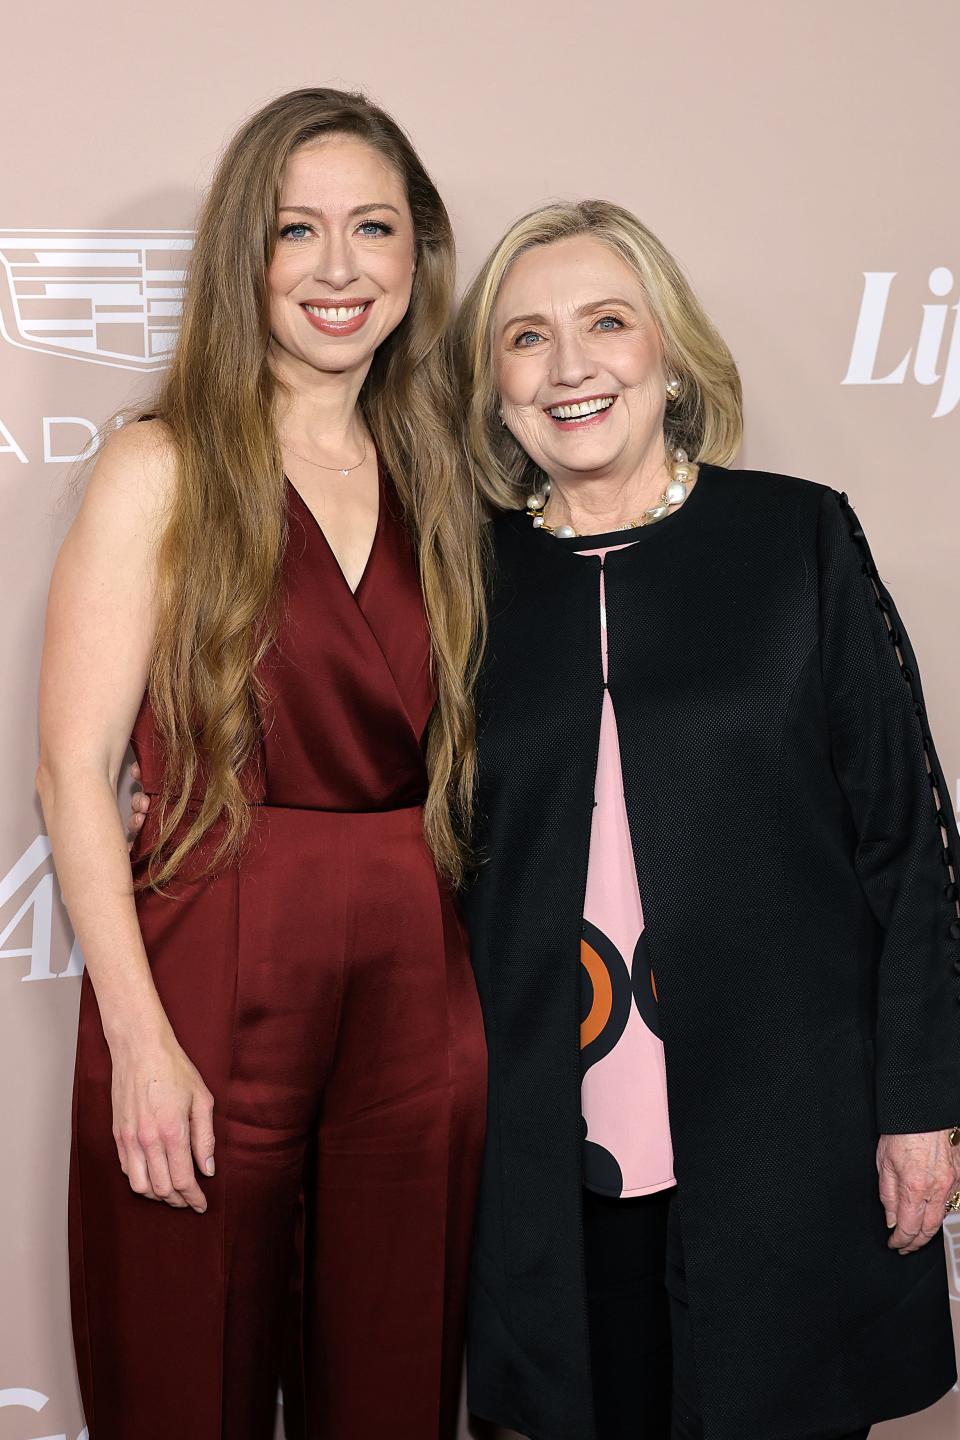 BEVERLY HILLS, CALIFORNIA - SEPTEMBER 28: (L-R) Chelsea Clinton and Hillary Clinton attend Variety's 2022 Power of Women: Los Angeles Event Presented by Lifetime on September 28, 2022 in Beverly Hills, California. (Photo by Amy Sussman/Getty Images) ORG XMIT: 775754486 ORIG FILE ID: 1428573878